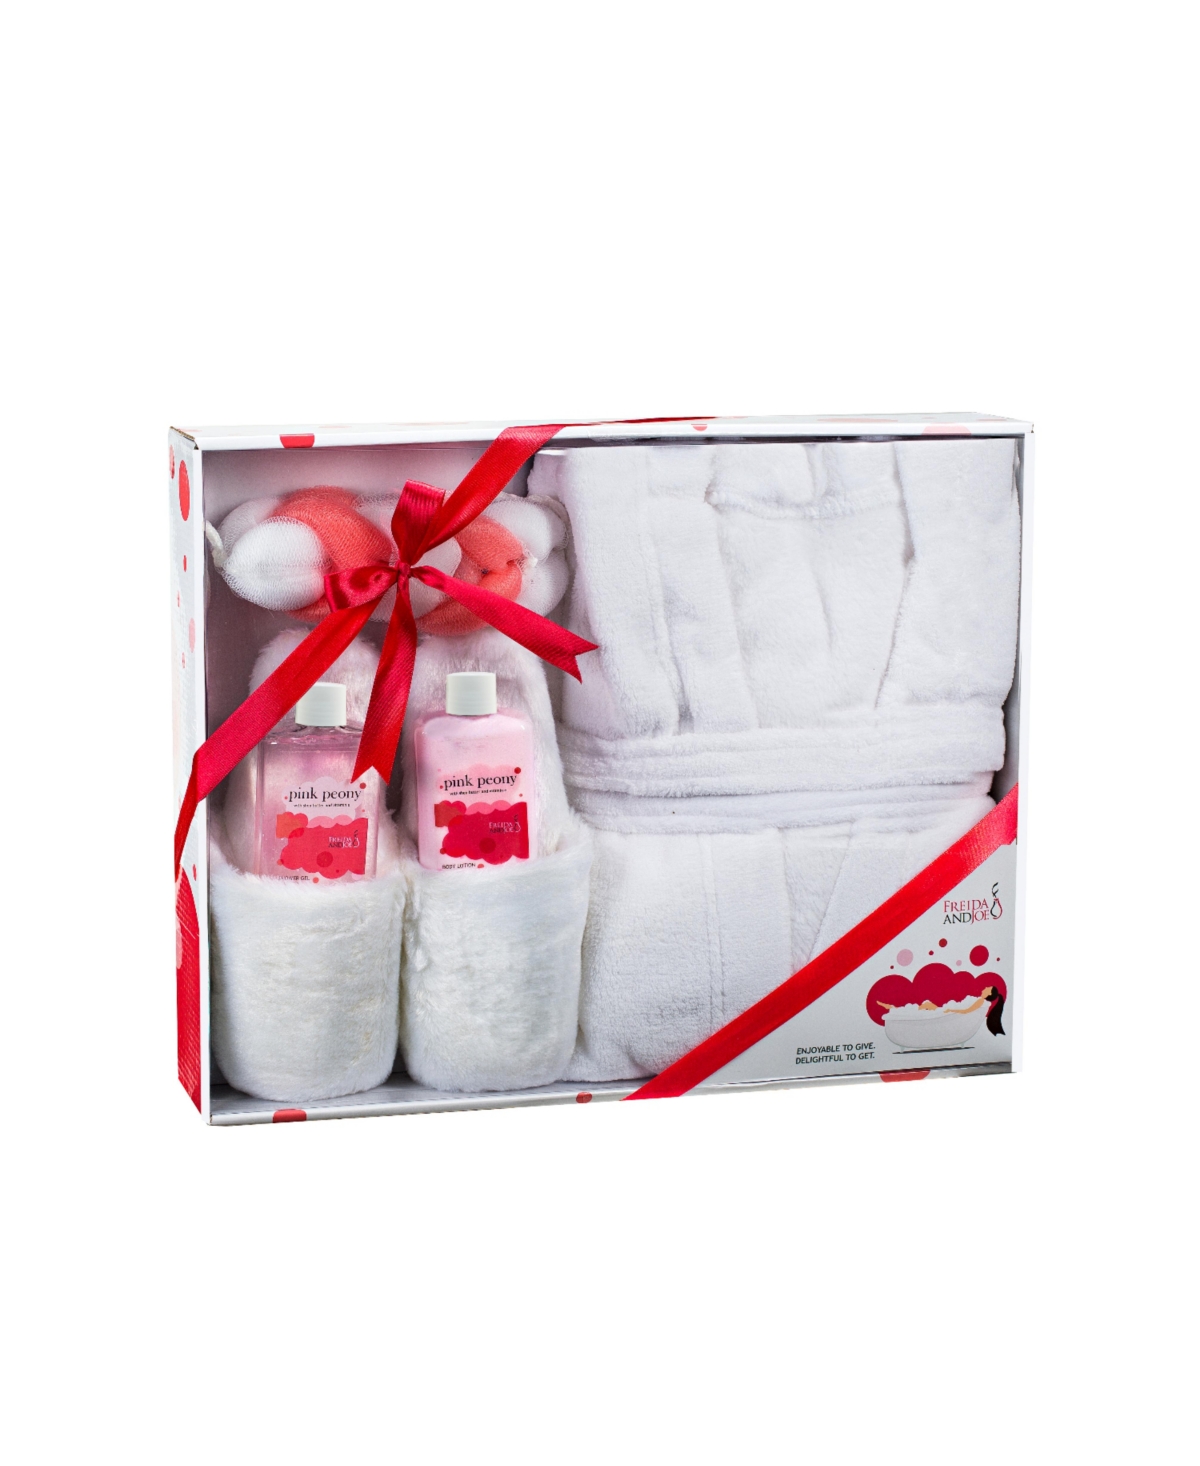 Bath & Body Spa Set in Pink Peony Fragrance with Luxury Bathrobe & Plush Slippers Luxury Body Care Mothers Day Gifts for Mom - Pink